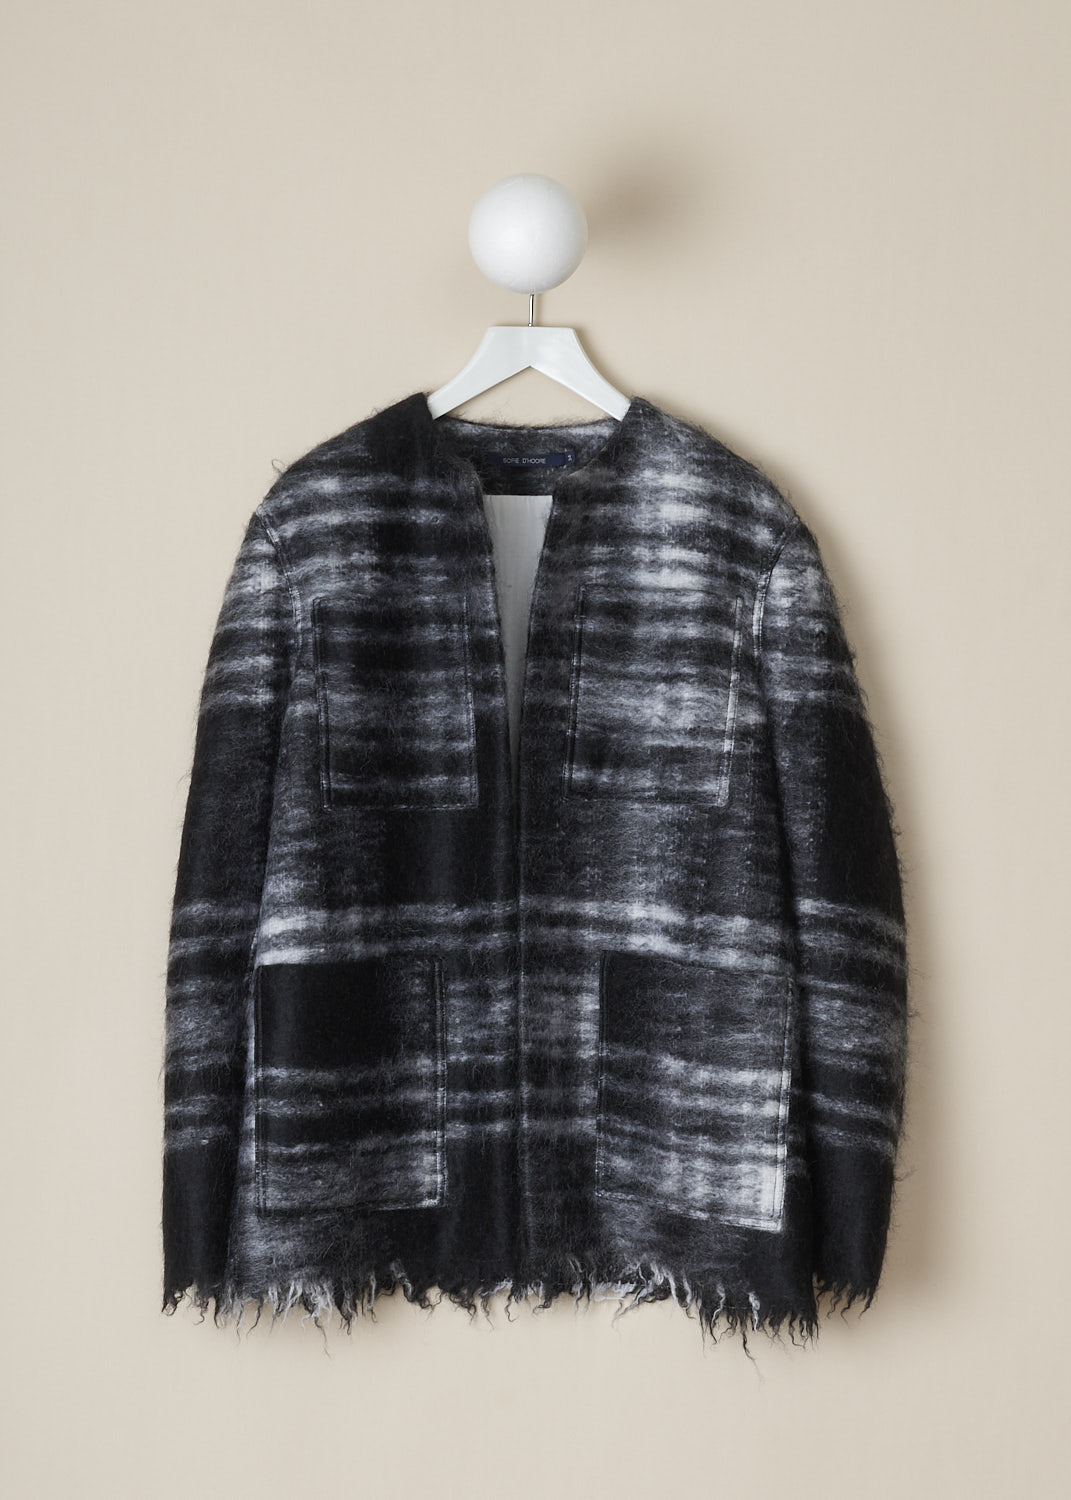 SOFIE Dâ€™HOORE, BLACK AND WHITE TARTAN CROFT JACKET, CROFT_WOMO_BLACK_TARTAN,  Black, White, Print, Front, This black and white tartan Croft jacket has a round neckline and an over front. In the front, the jacket had four big patch pockets. The long sleeves and hemline have a edged finish. The jacket is fully lined. 
 
